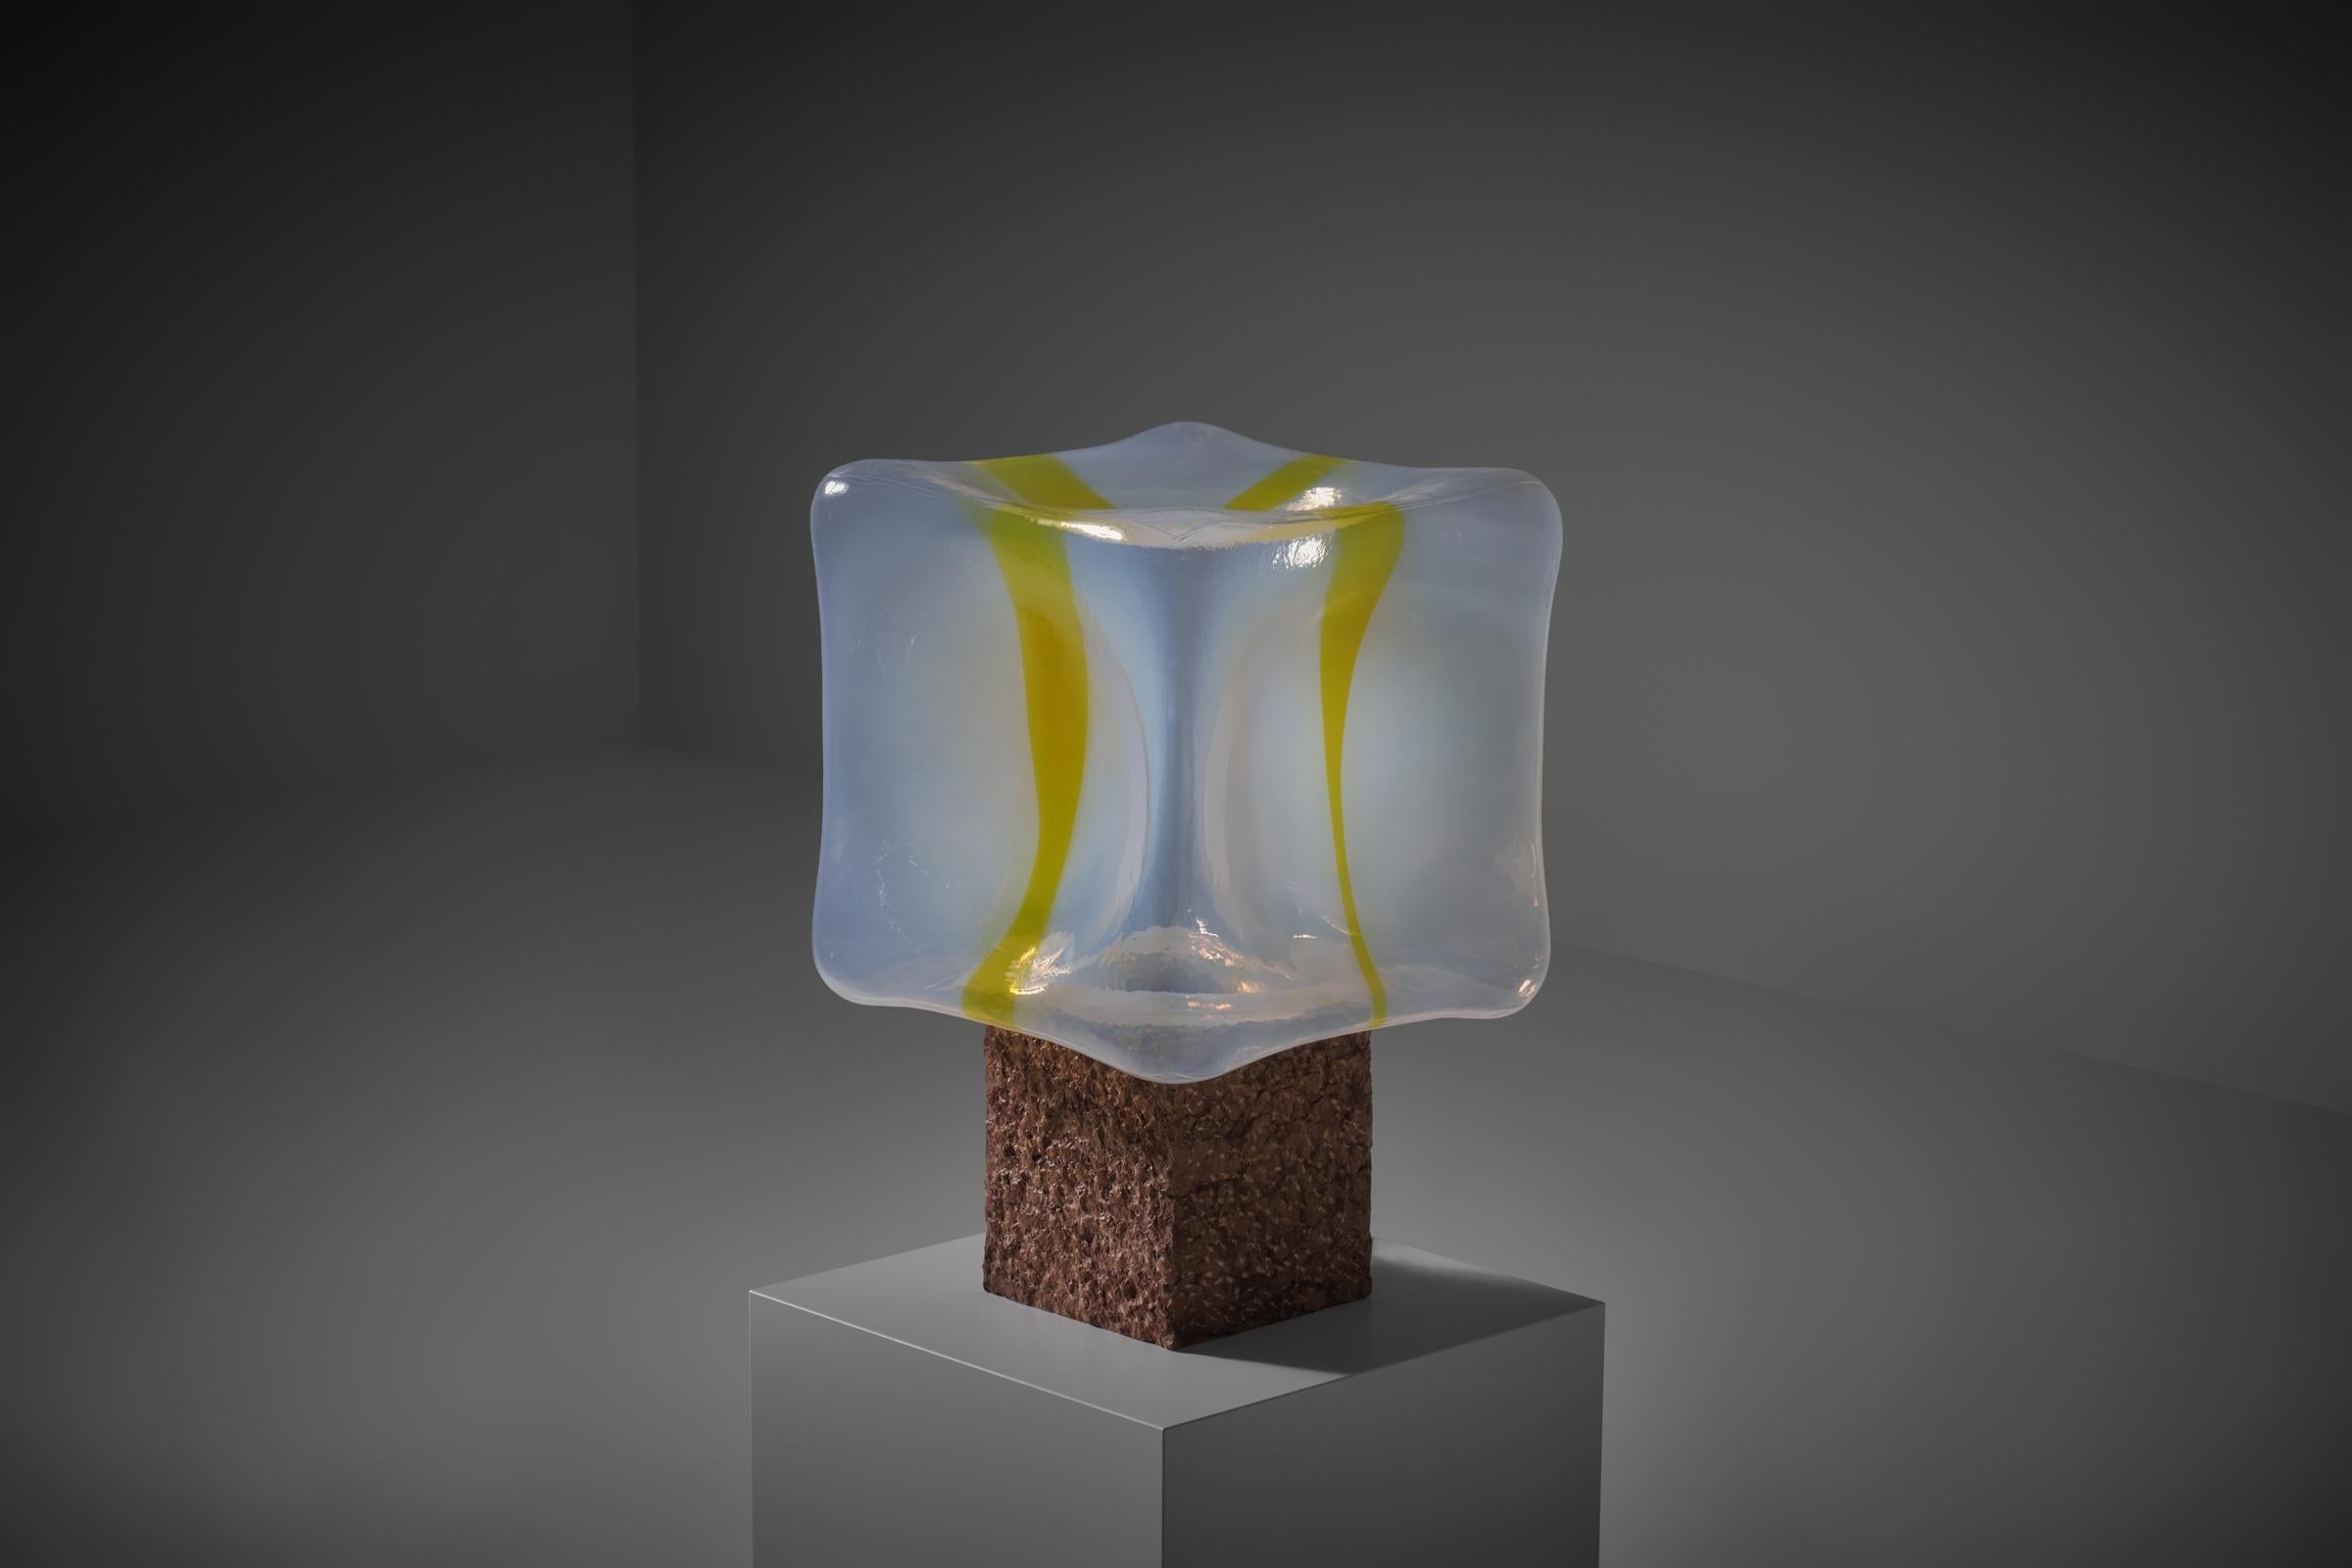 Roberto Patio & Renato Toso 'Sierra' table lamp for Leucos, Italy 1970s. Rare sculptural model with a large cubic shaped shade from mouth blown Murano glass in transparant milky / 'yellyfish' iridescent colored glass with a decorative yellow line